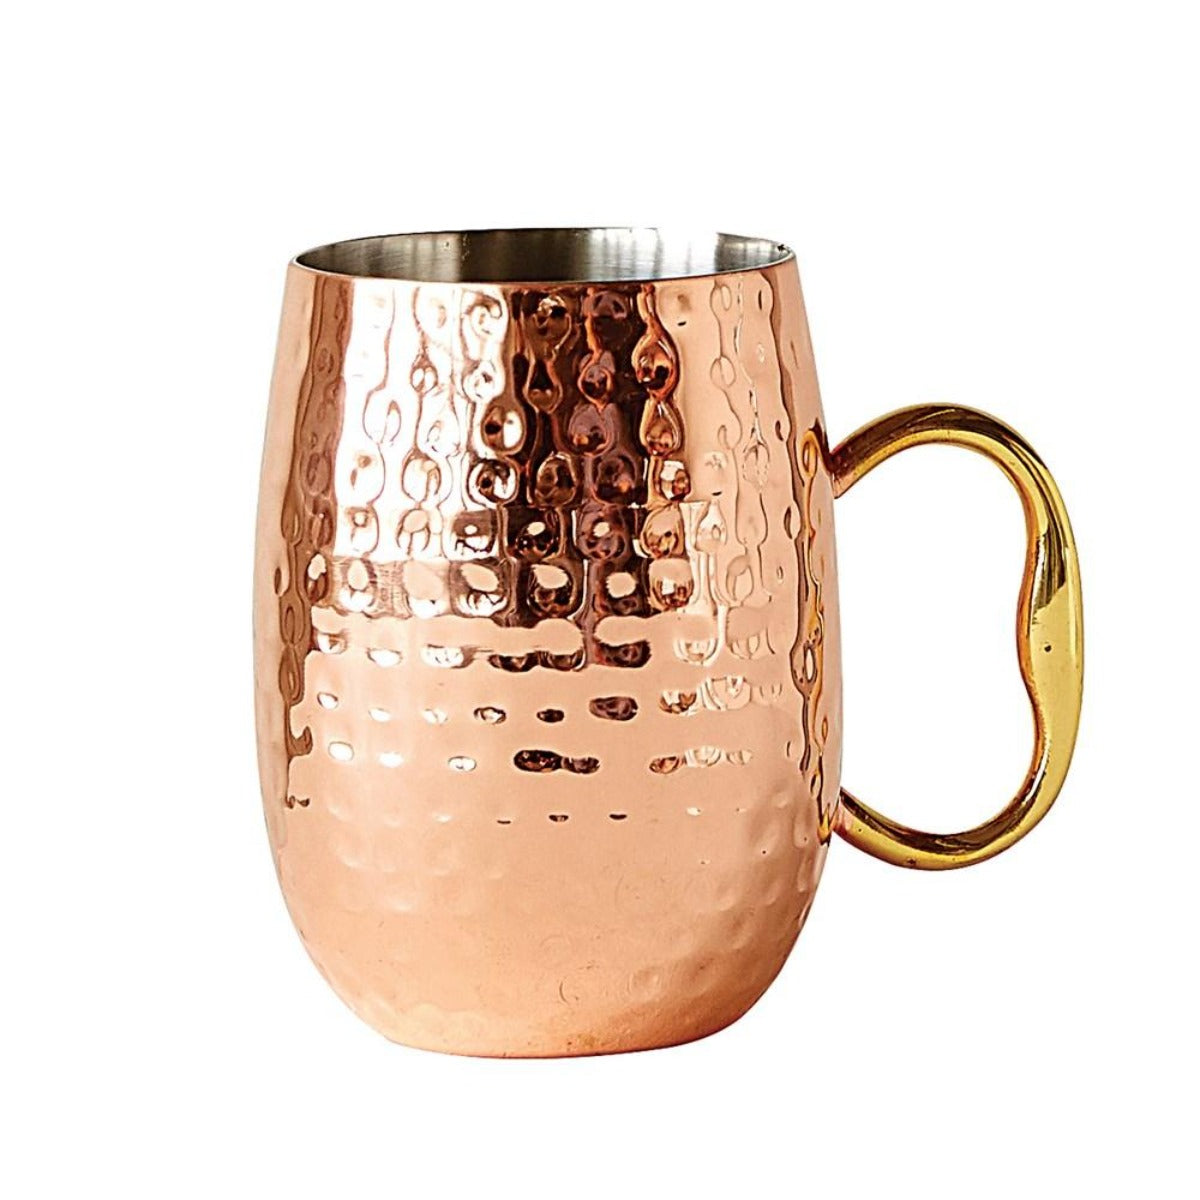 Moscow Mule Mug - Iron Accents